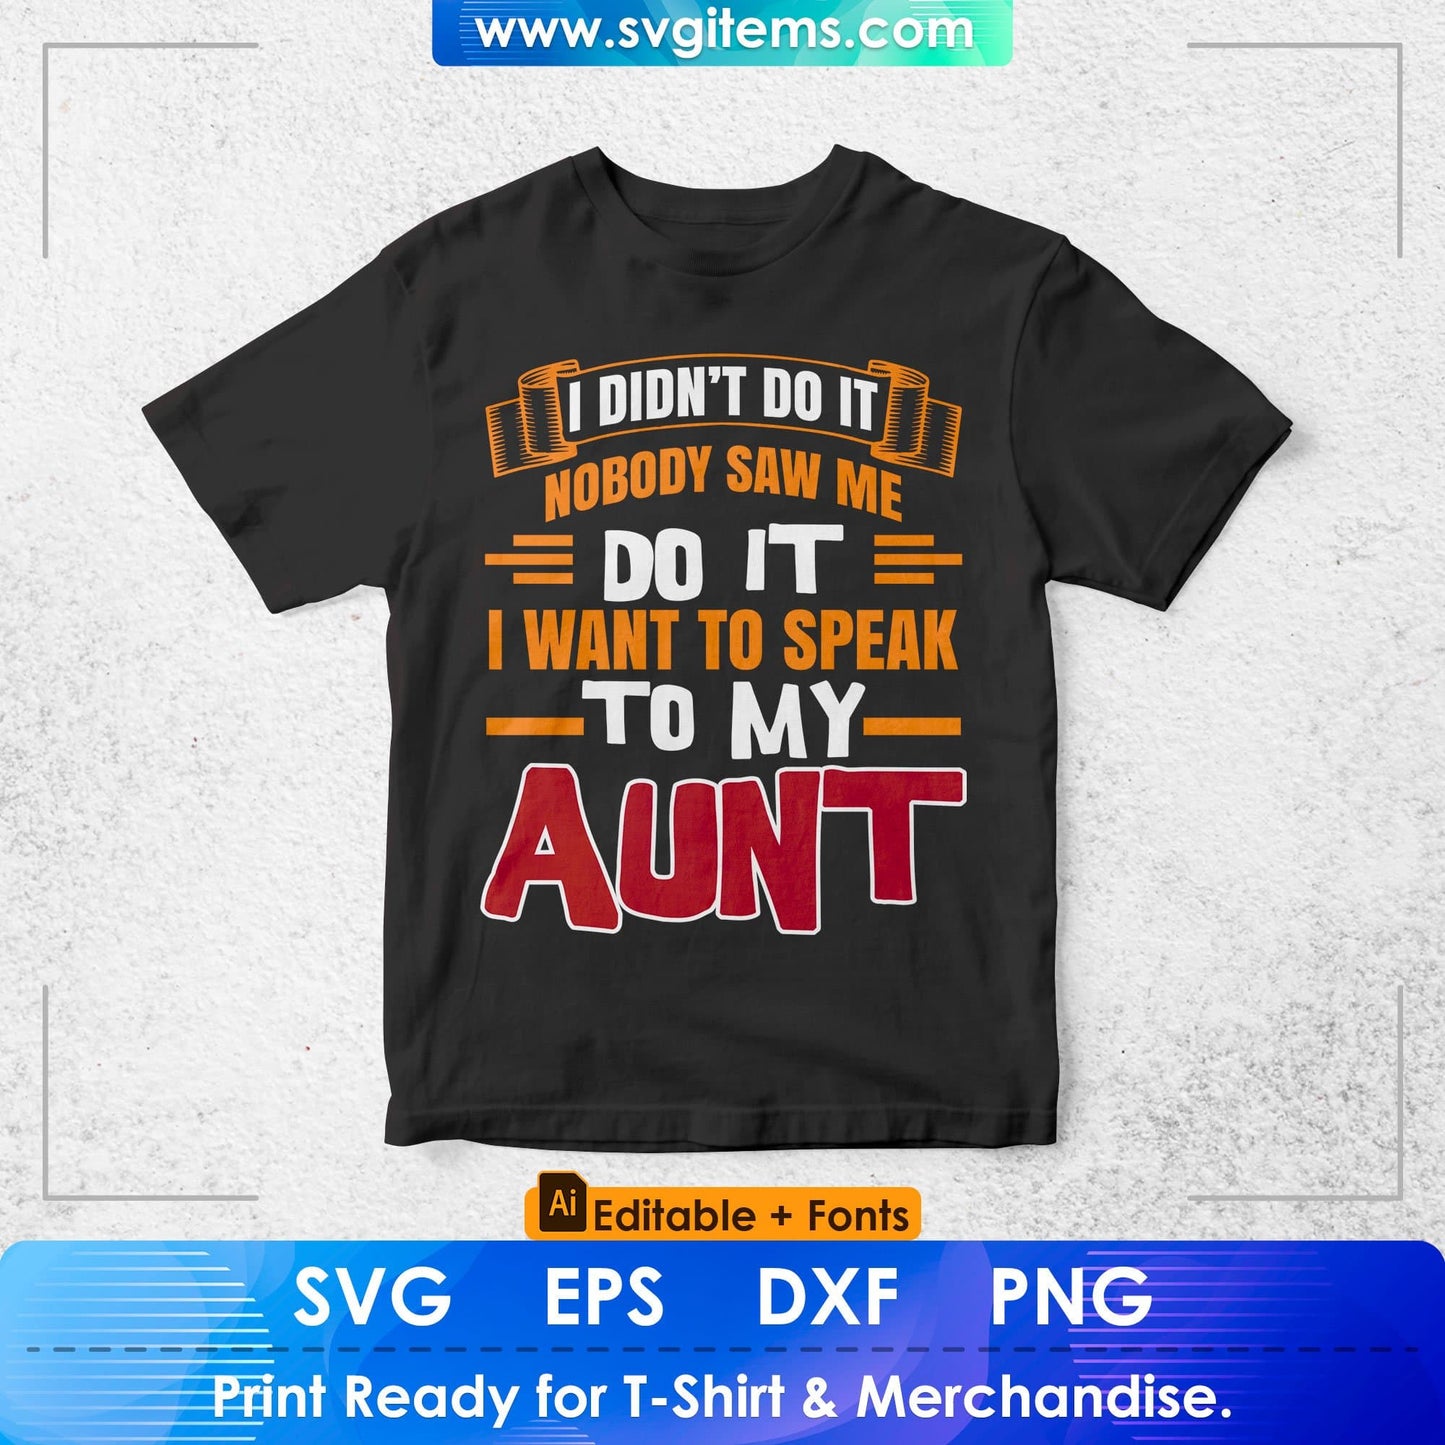 I Didn't Do It Nobody Saw Me Do It I Want To Speak To My Aunt Editable T shirt Design Svg Cutting Printable Files